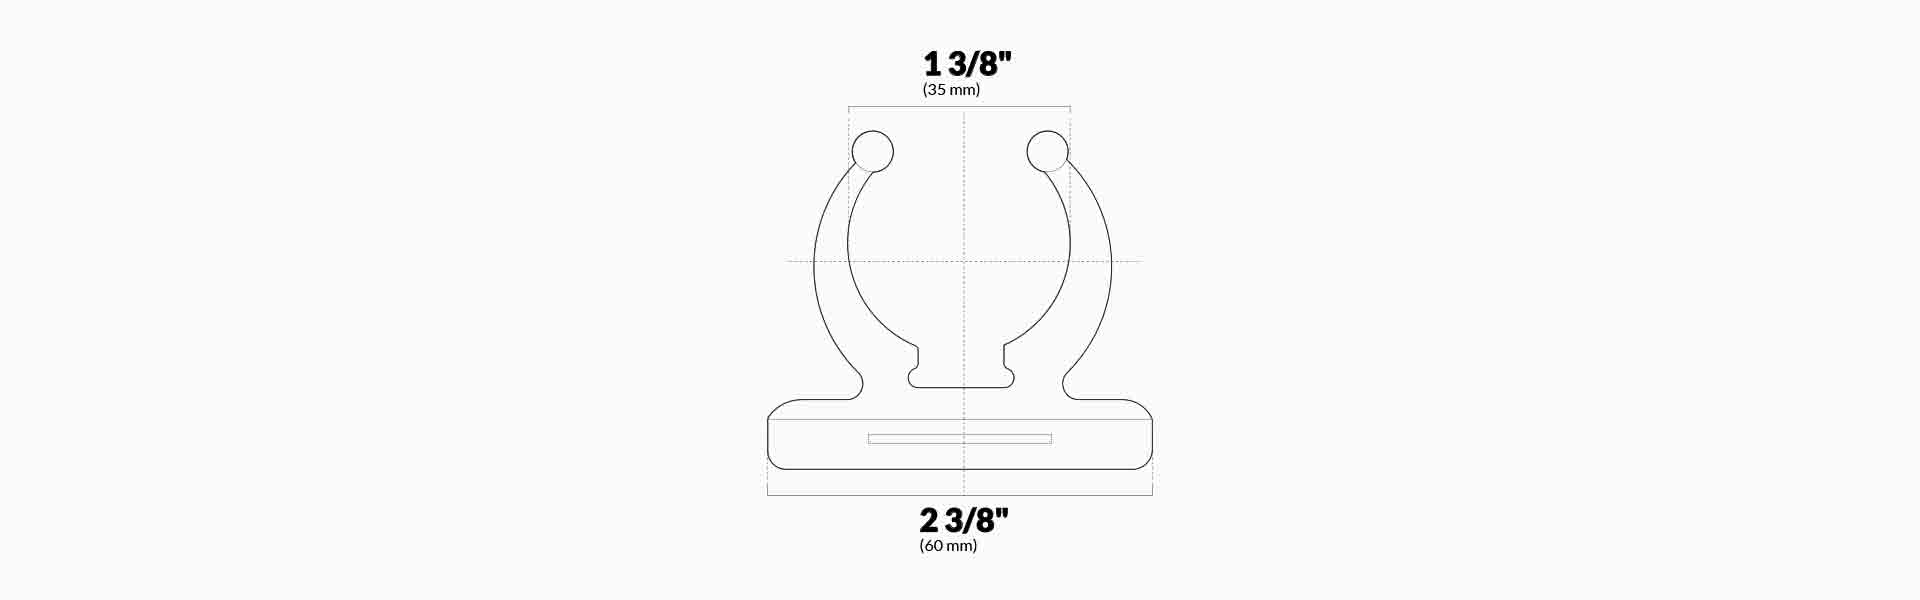 product_dimensions